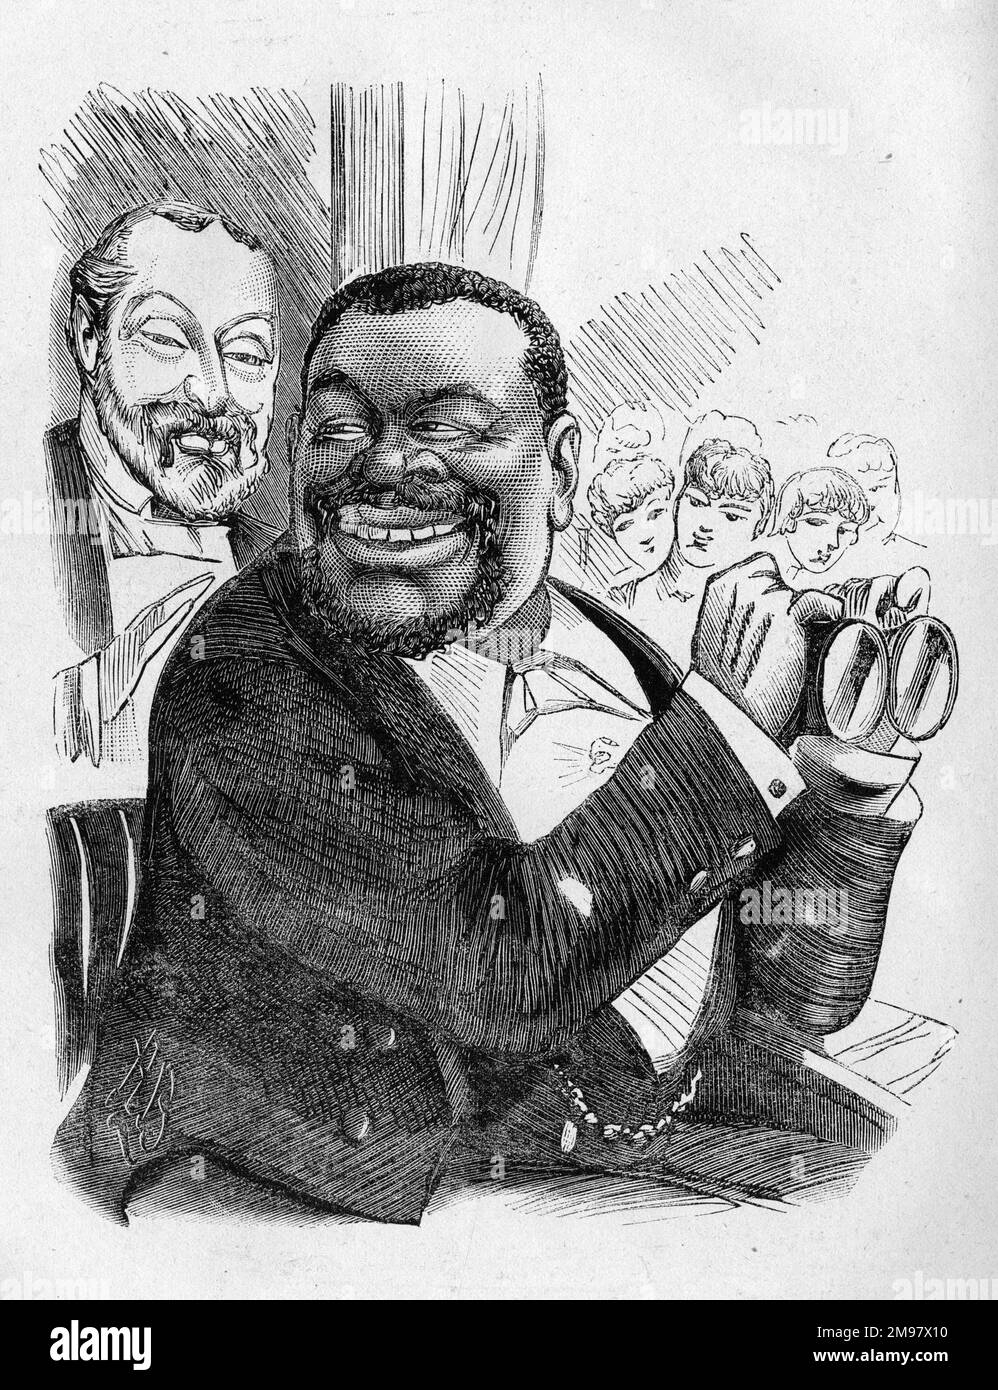 Cartoon of Cetewayo (Cetshwayo kaMpande, 1826-1884), Zulu king, in the Royal Box at a theatre with Edward, Prince of Wales behind him. Stock Photo